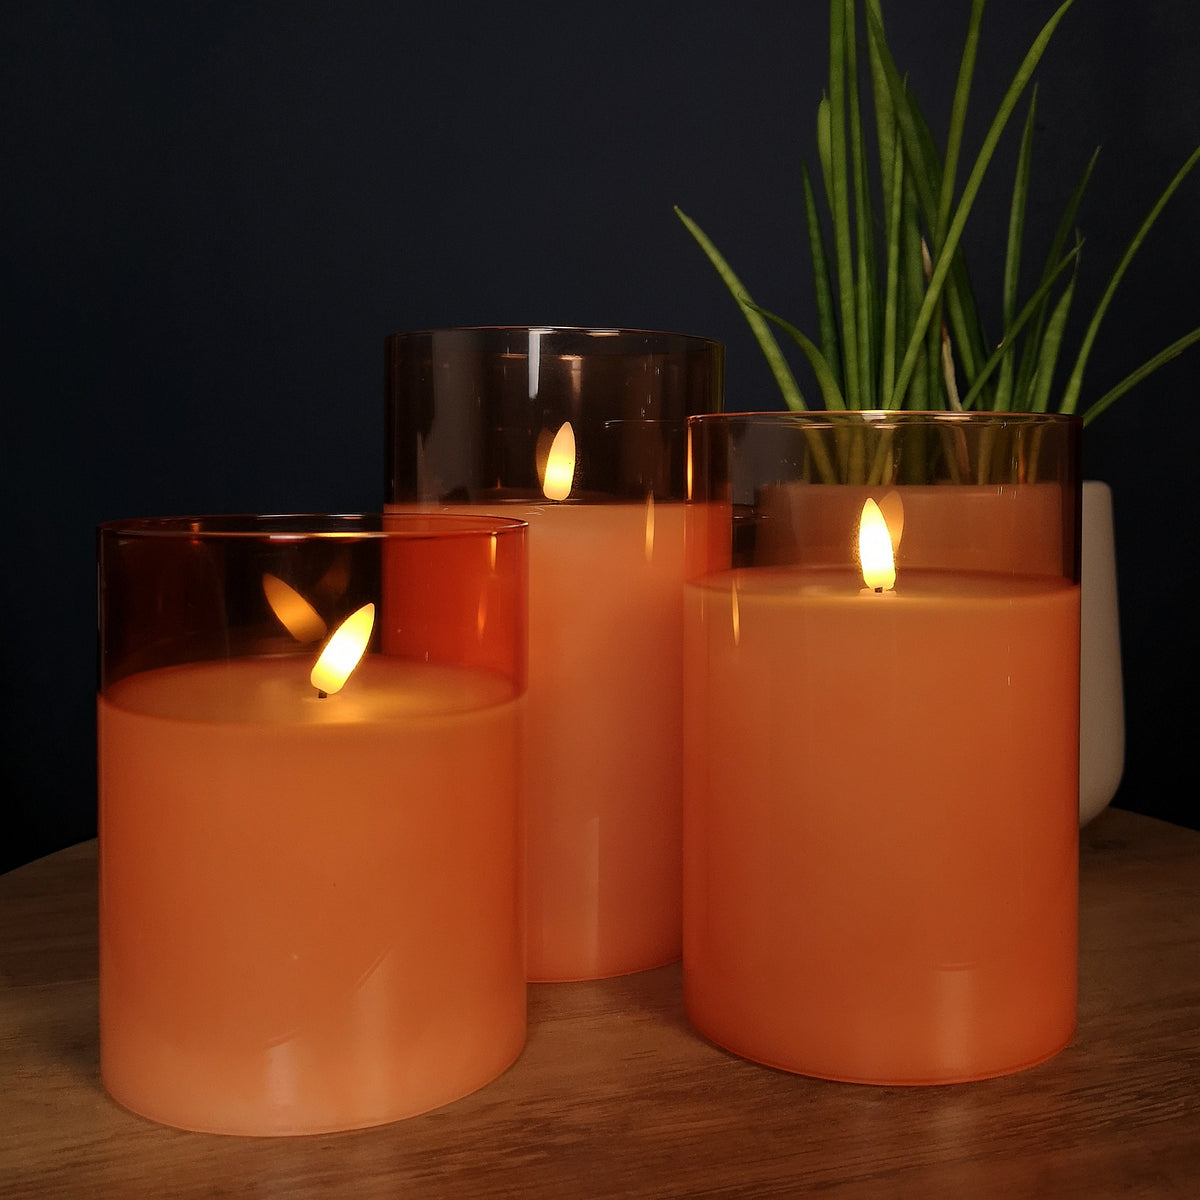 Set of 3 Warm White Battery Operated Christmas Wax Candles with Timer in Peach Glass